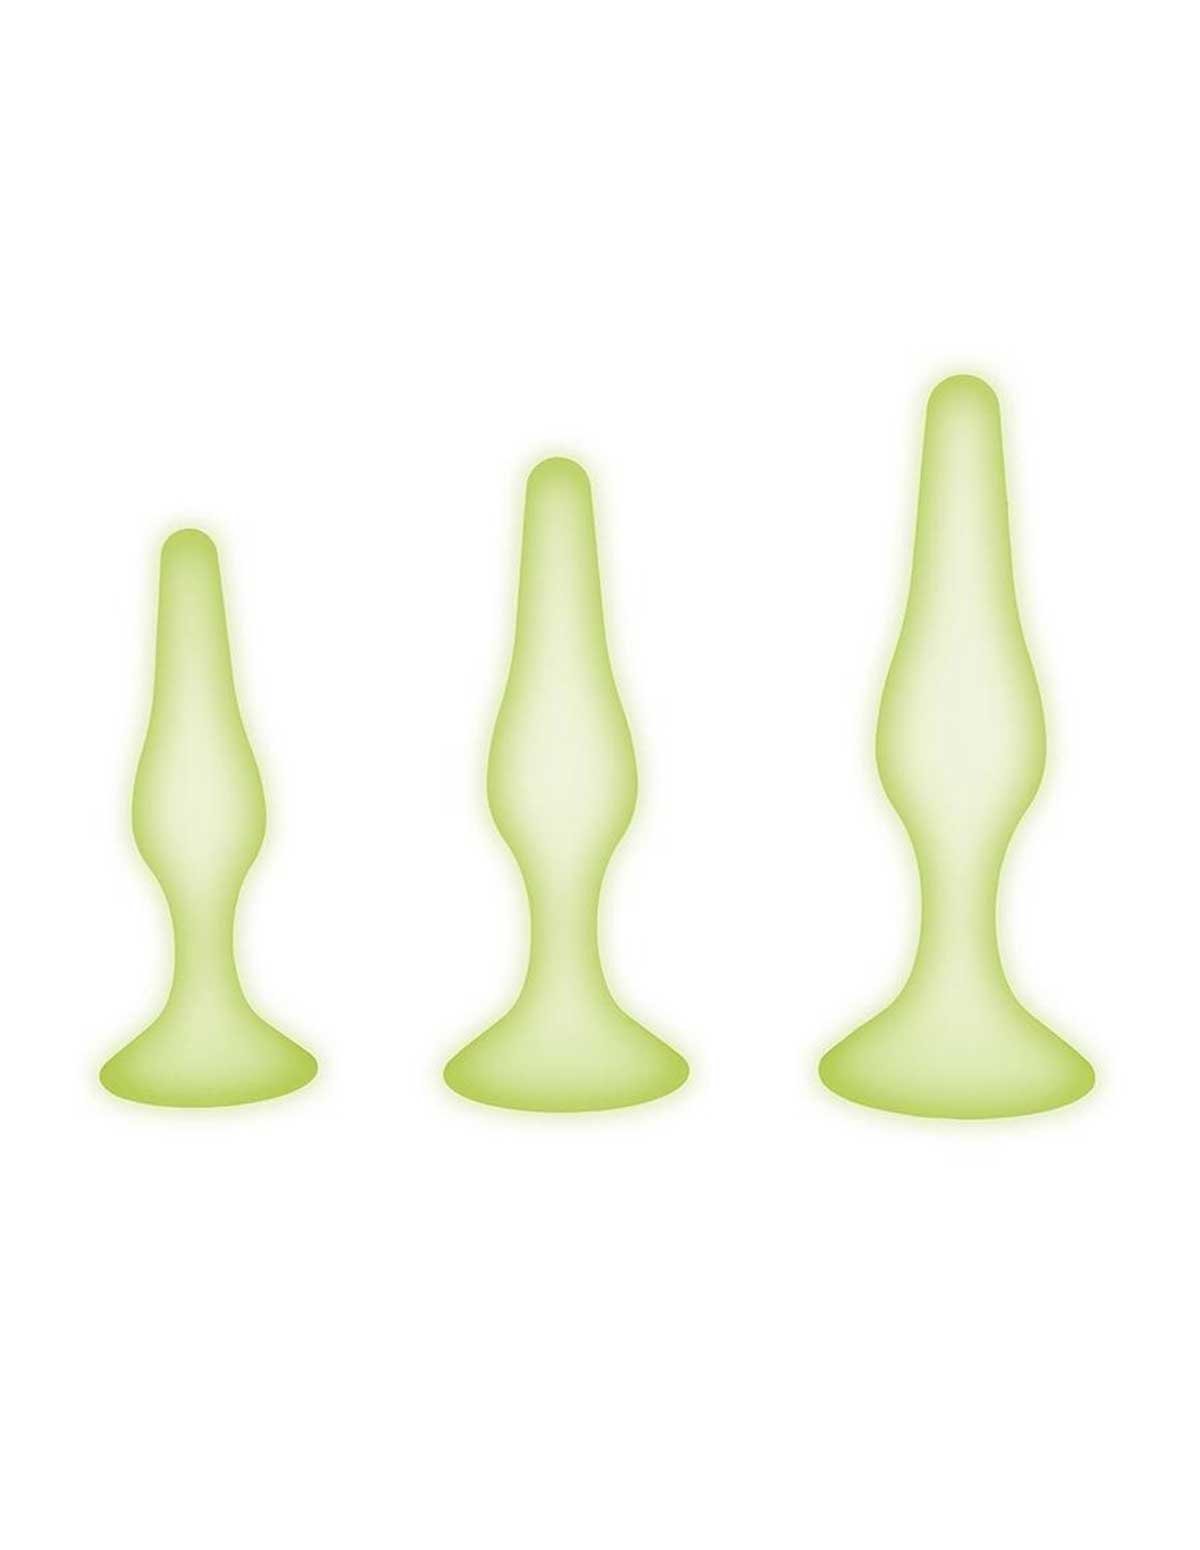 alternate image for Whipsmart 3Pc Glow In The Dark Silicone Anal Training Set